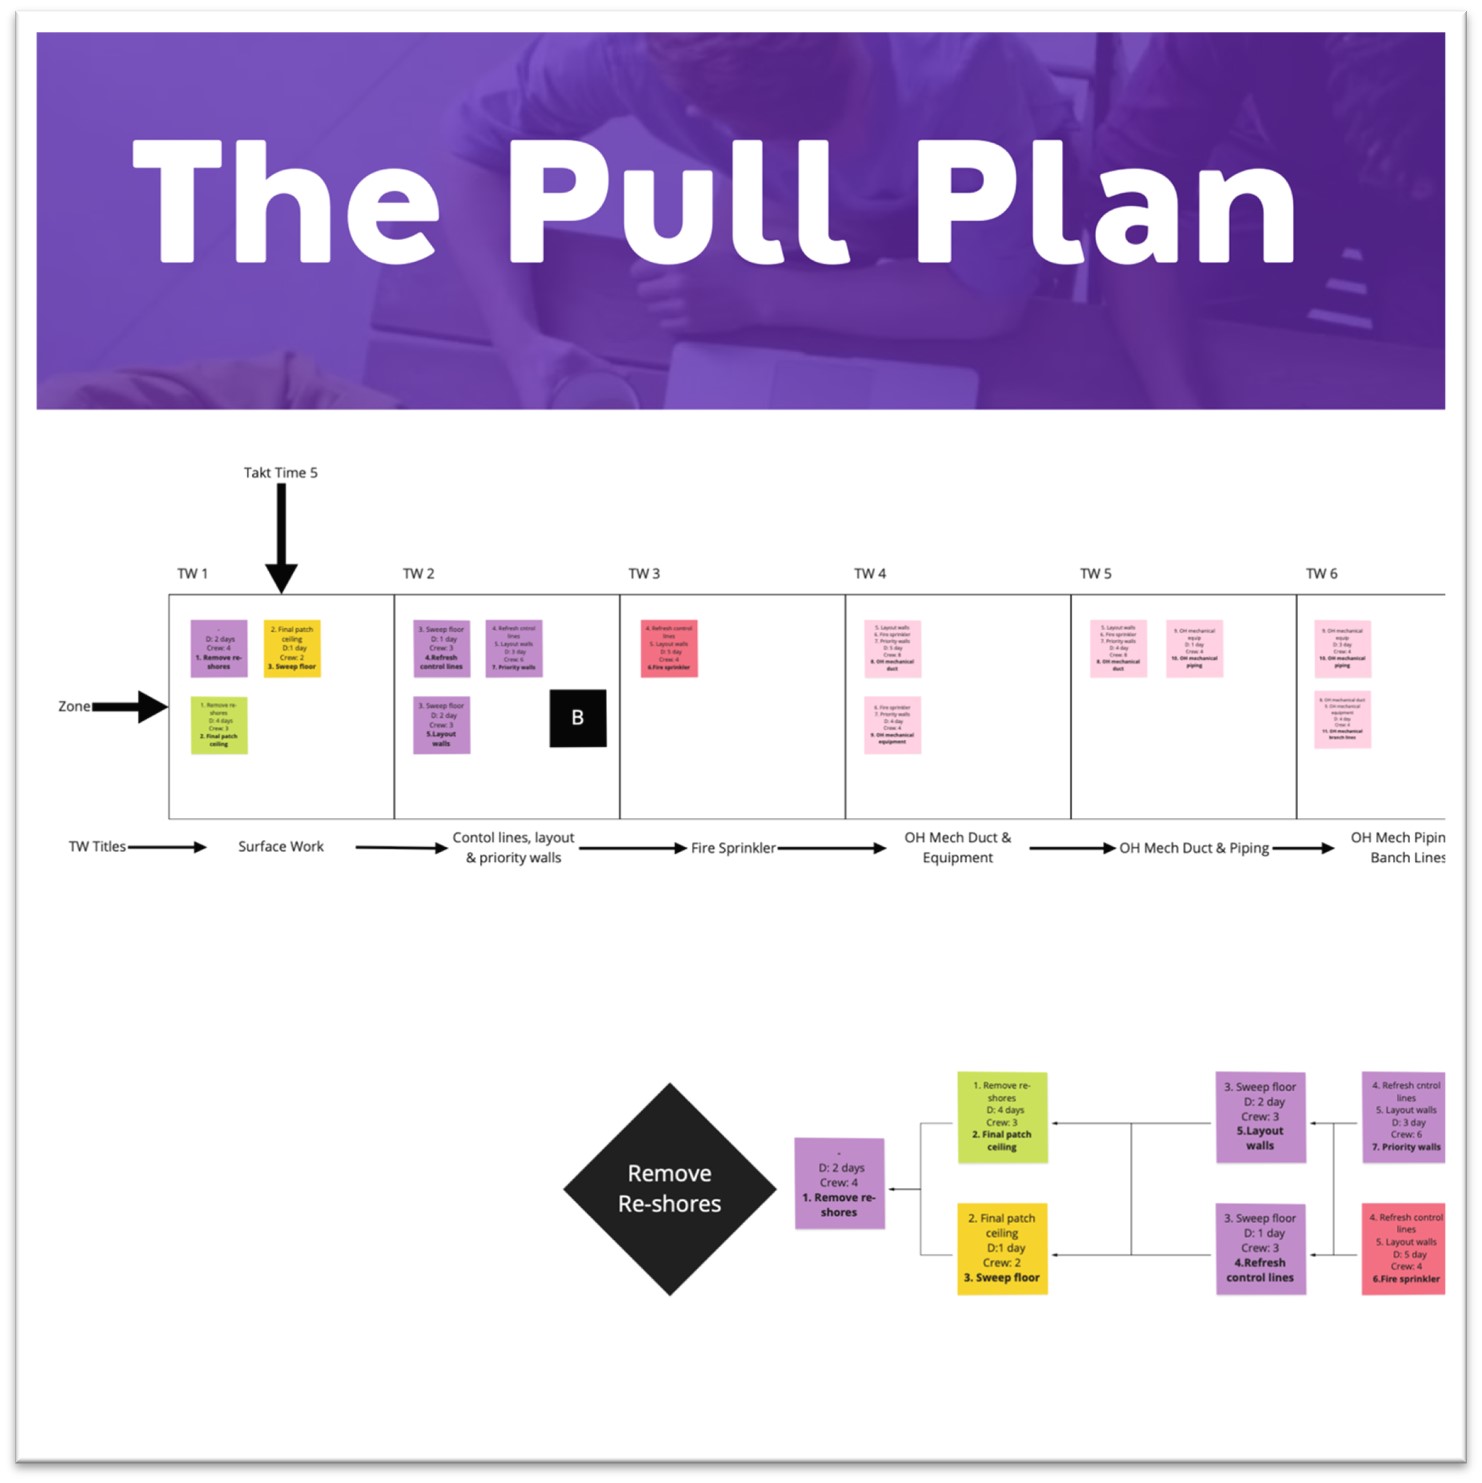 Image of the pull plan and packaging effort.